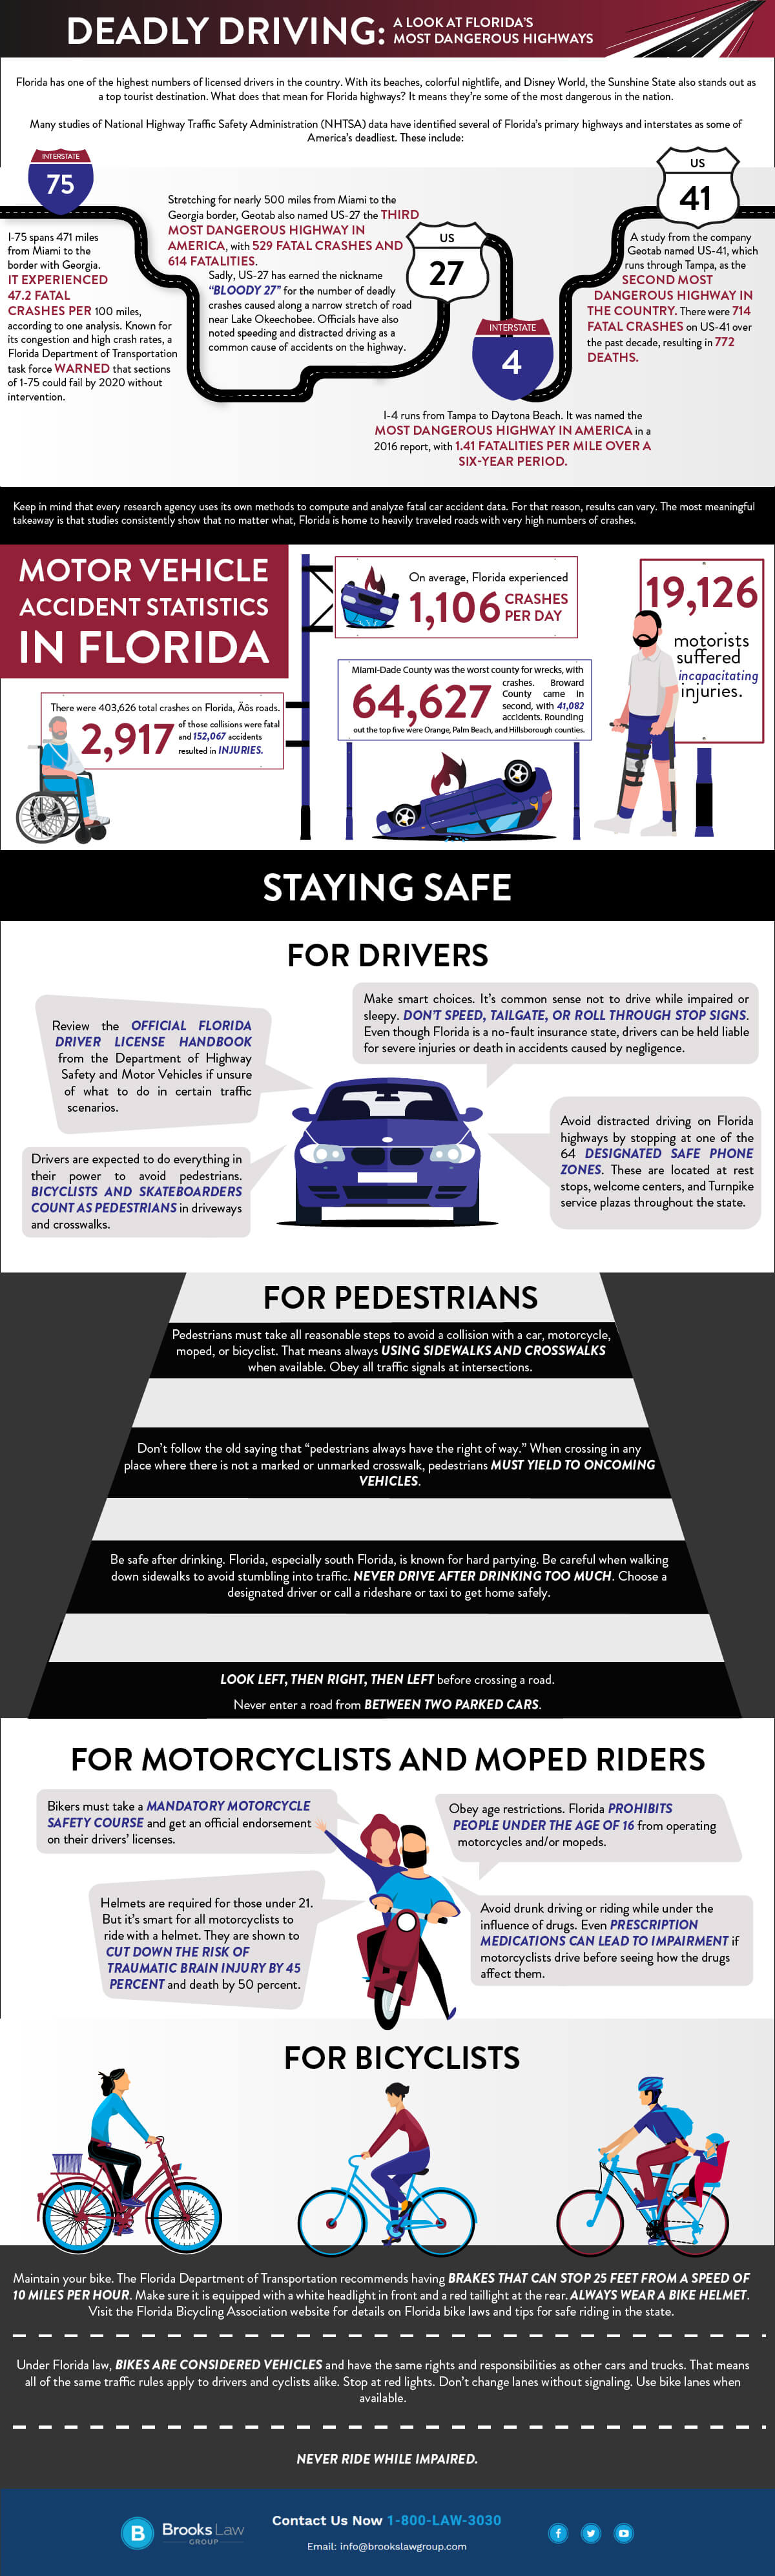 Brooks-Law-Group-Mostly-Deadly-Highways-Florida-Infographic.jpg  by brookslawgroup